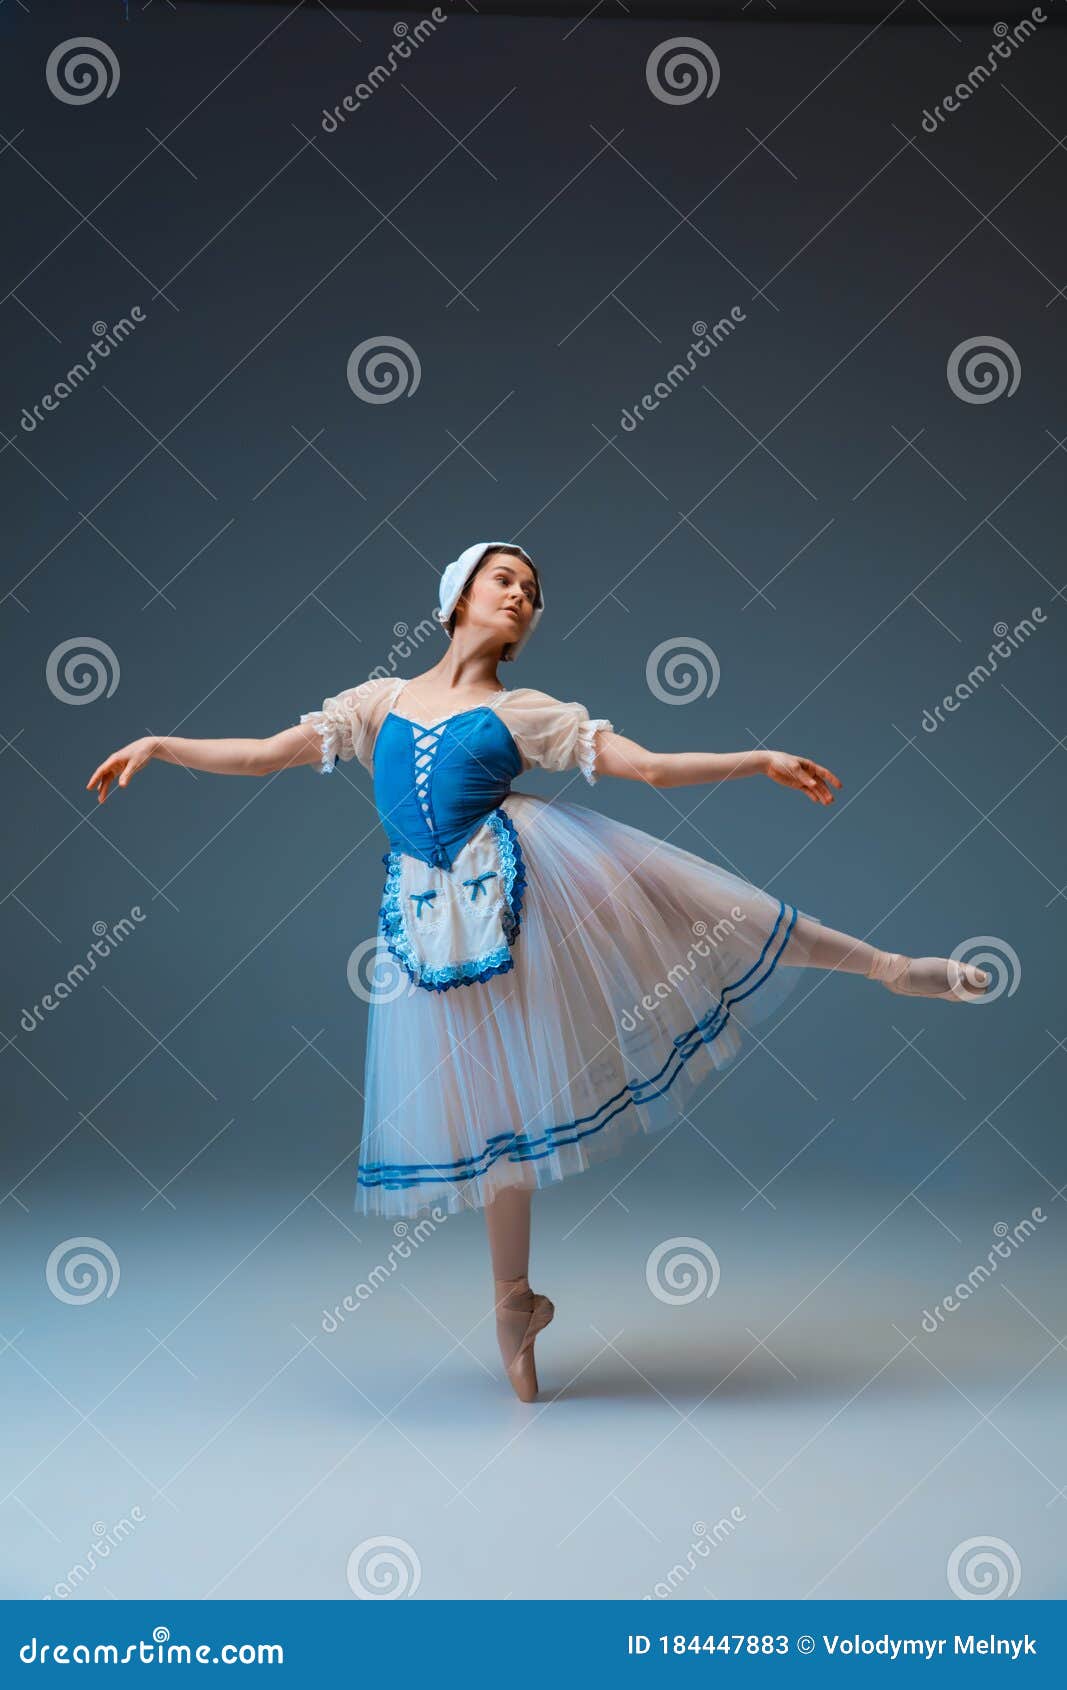 young and graceful female ballet dancer as cinderella fairytail character